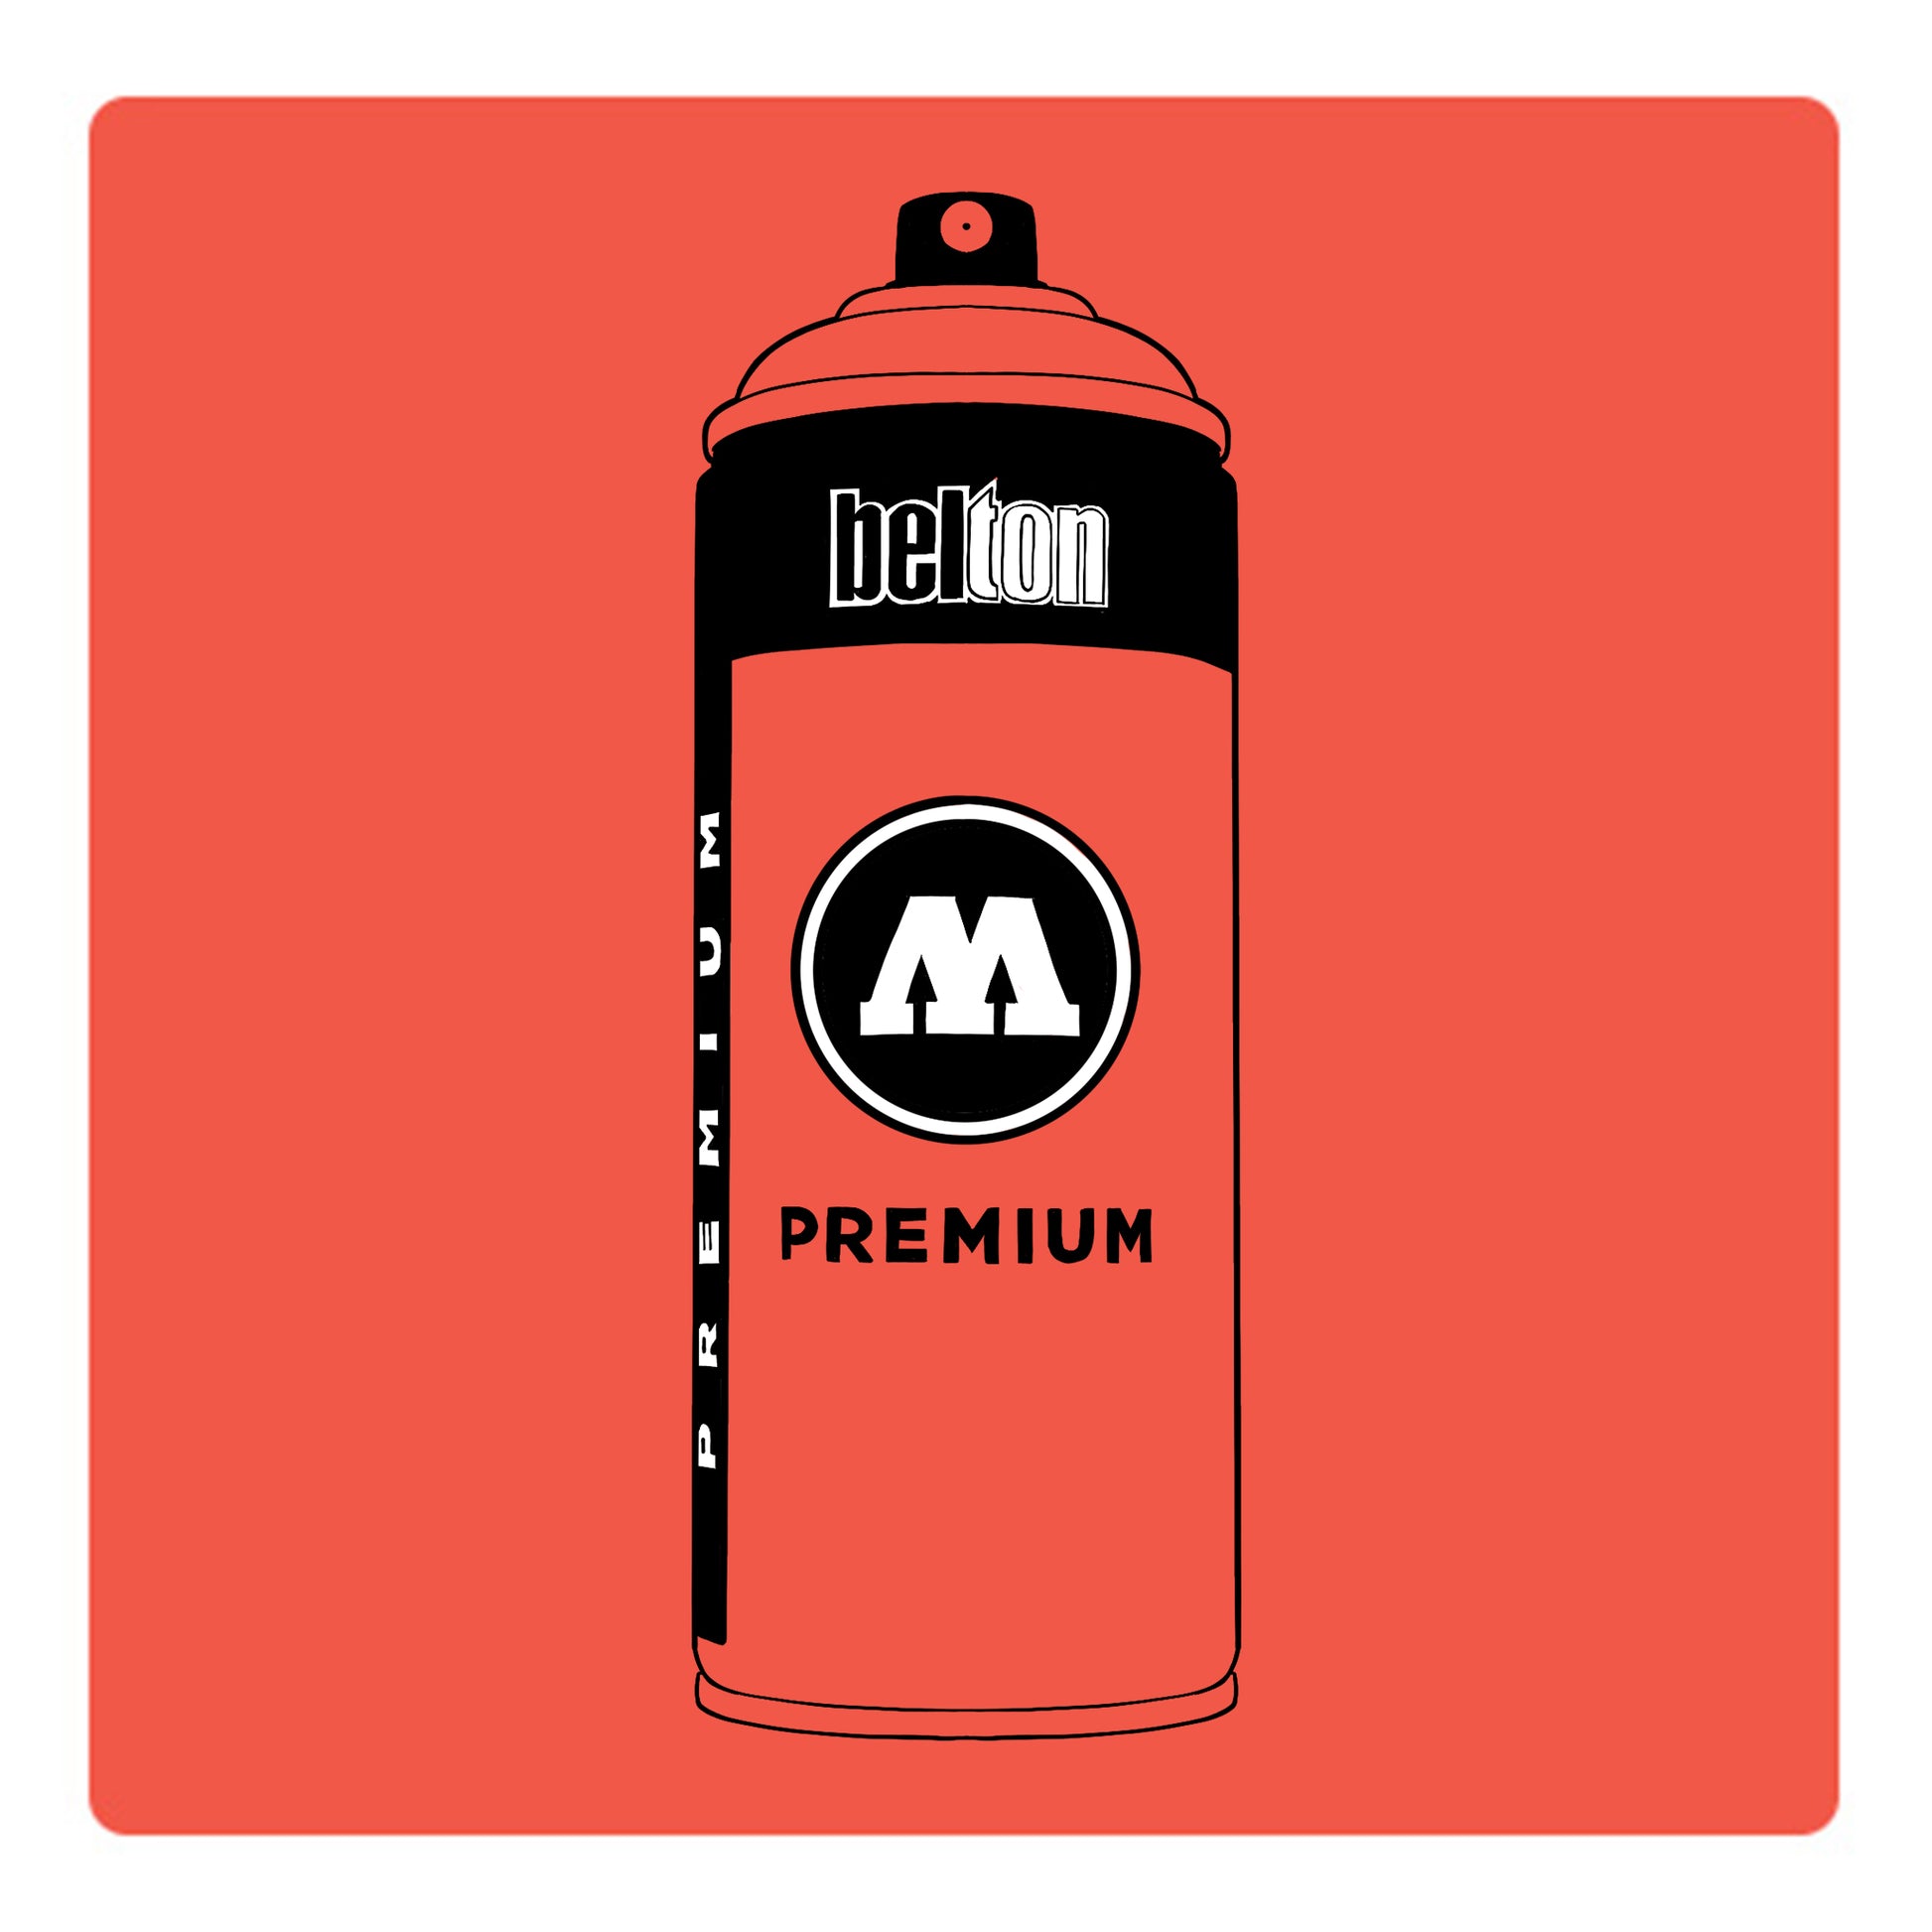 A black outline drawing of a pastel red spray paint can with the words "belton","premium" and the letter"M" written on the face in black and white font. The background is a color swatch of the same pastel red with a white border.